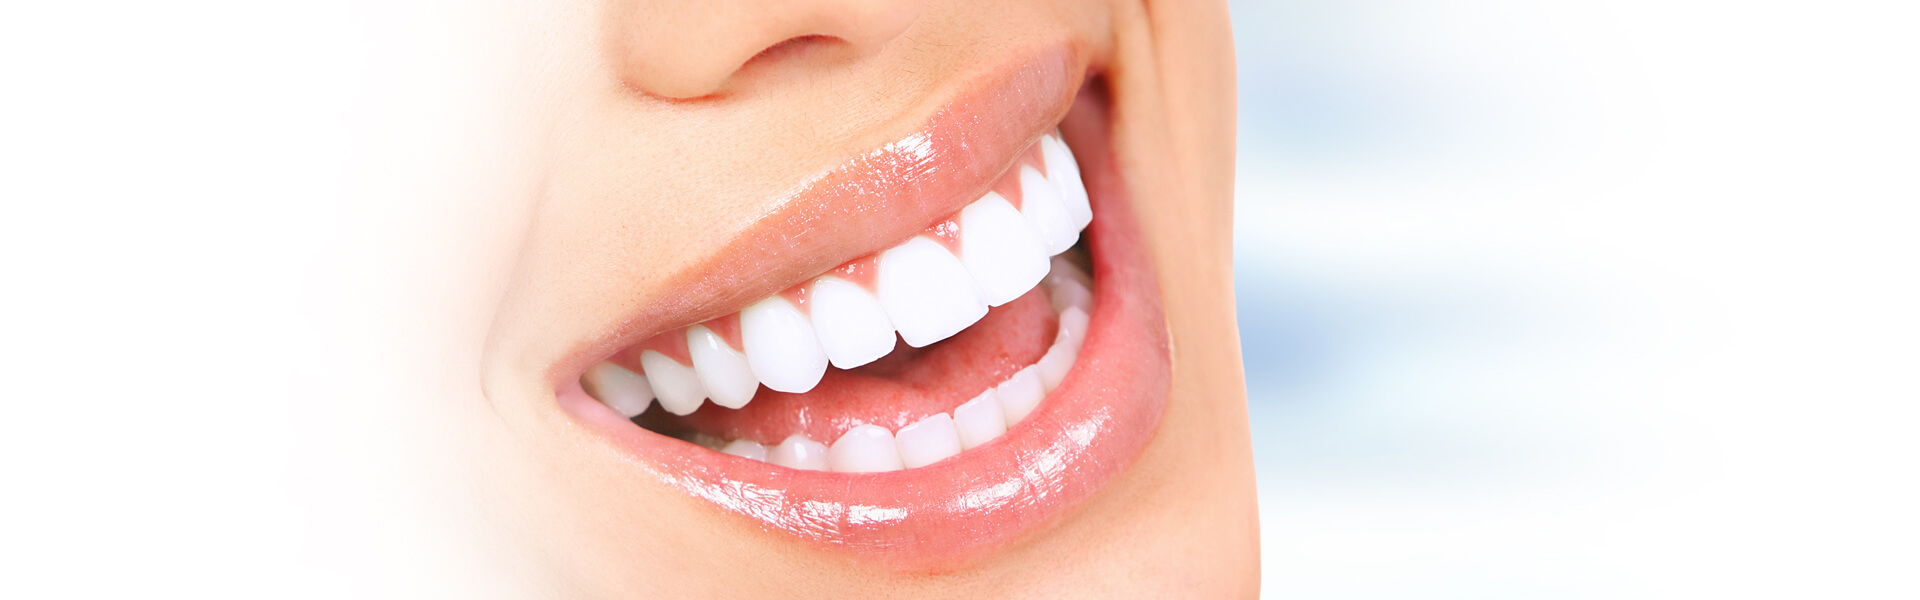 5 Natural Teeth Whitening Home Remedies